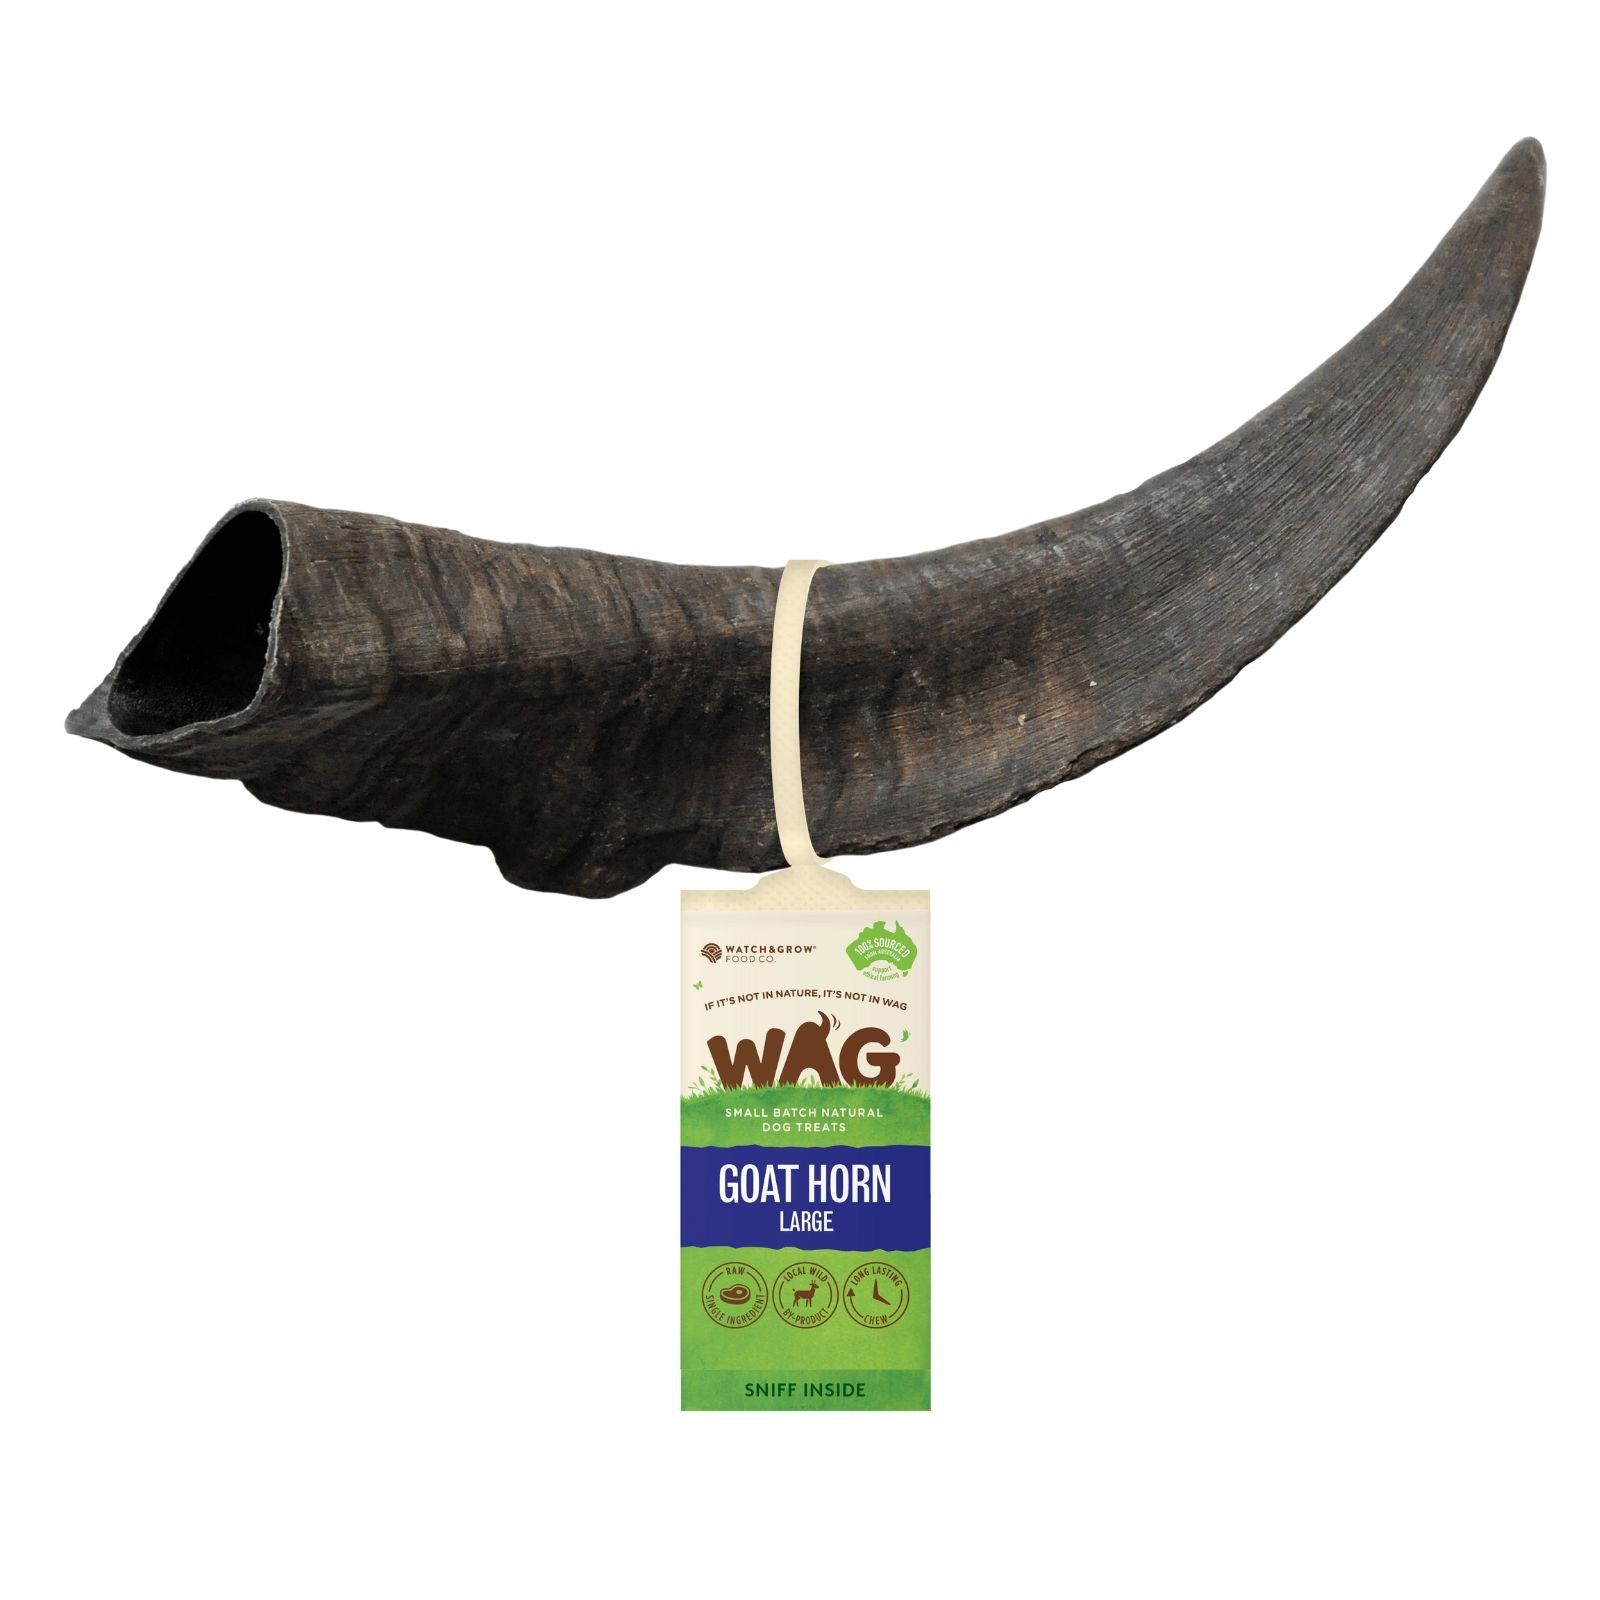 WAG Australian Goat Horn large chew treat for dogs.